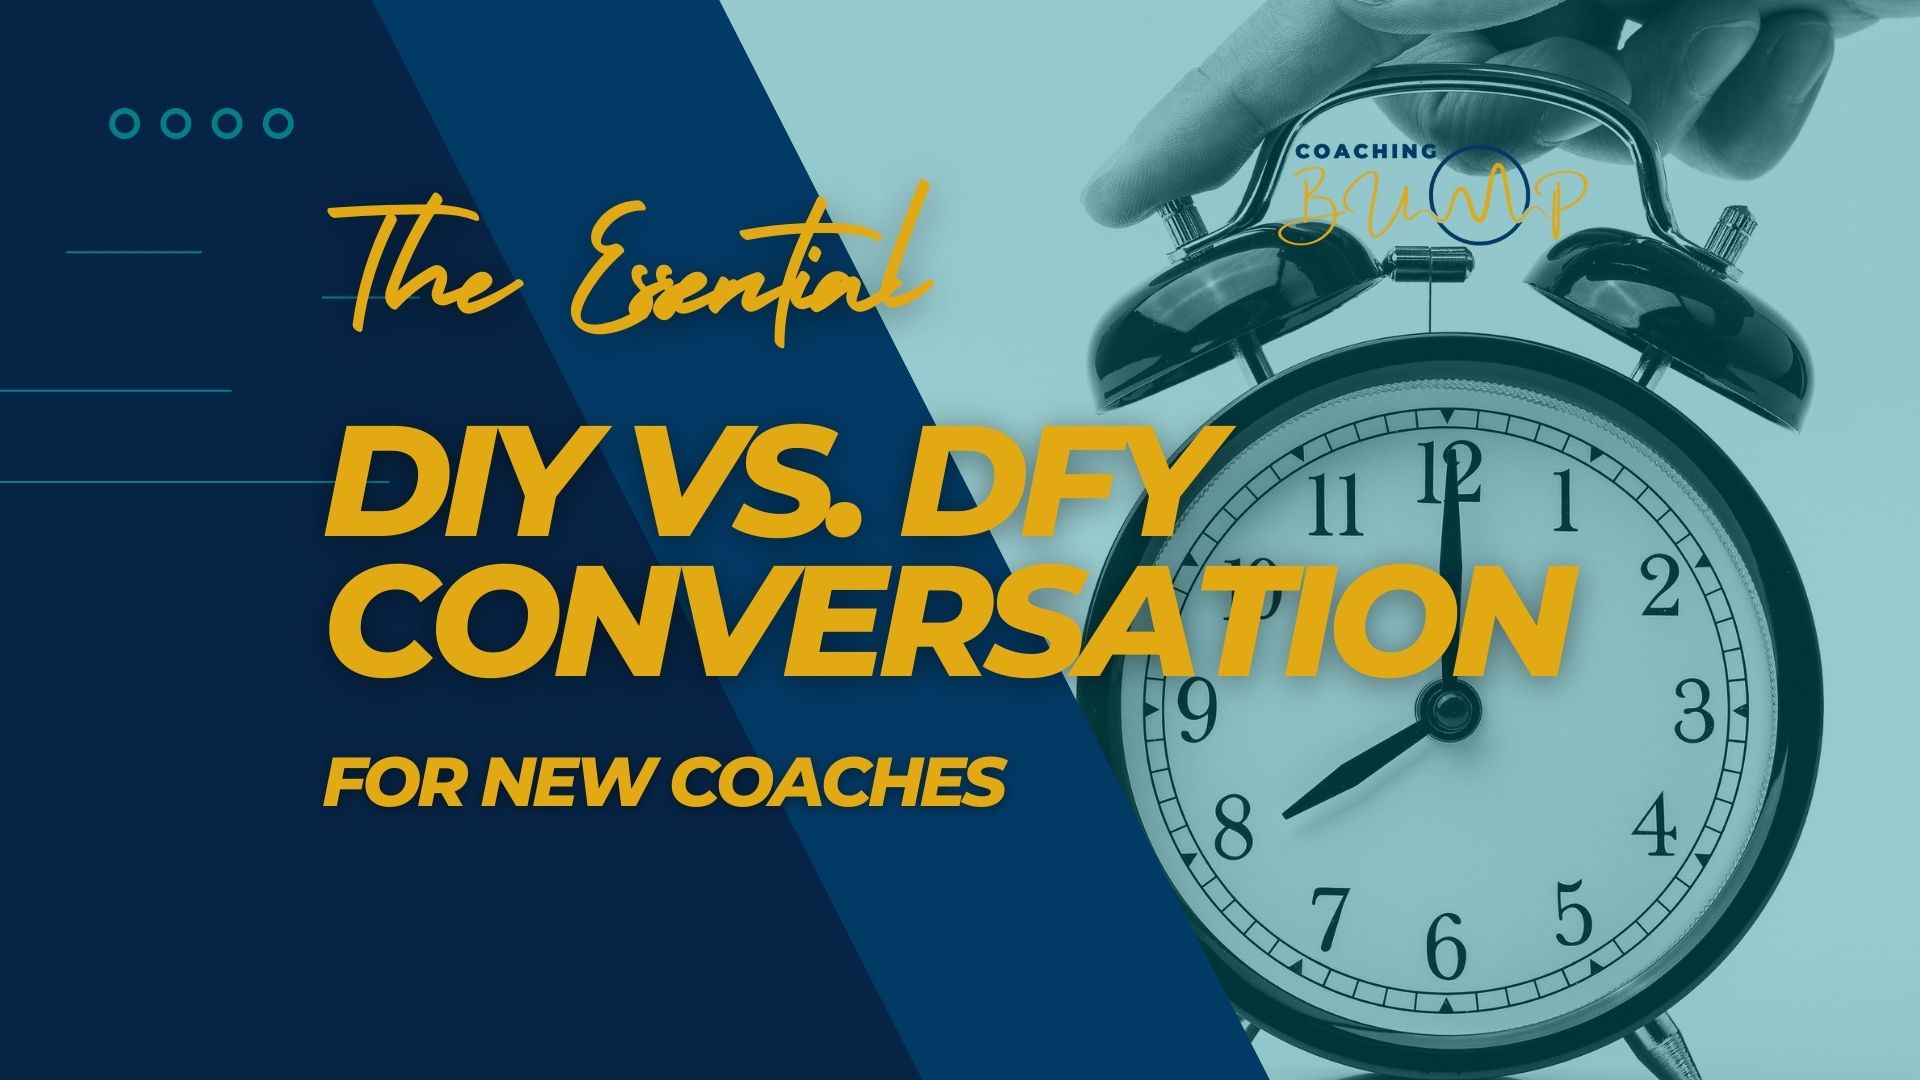 The Essential DFY vs. DIY Conversation For New Coaches